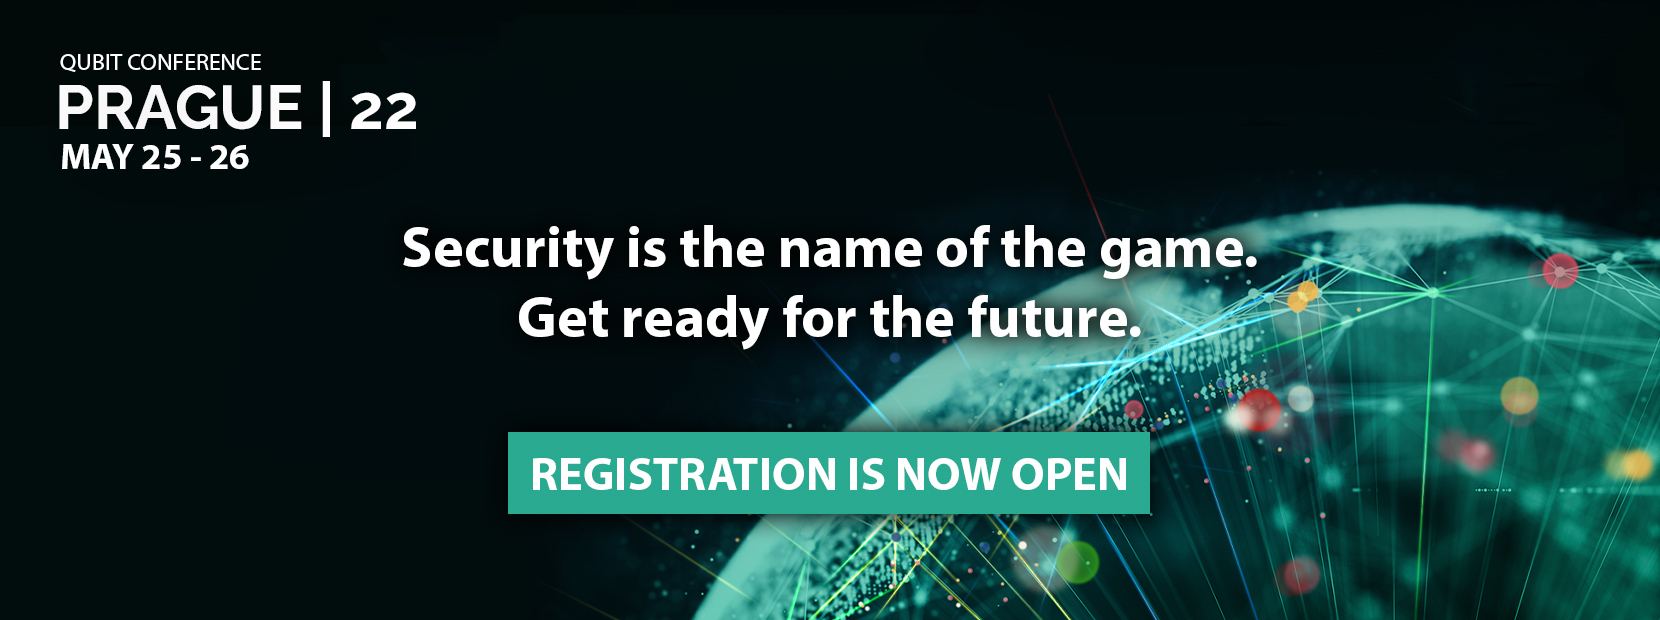 Cybersecurity Conference Prague 2022 Registration open